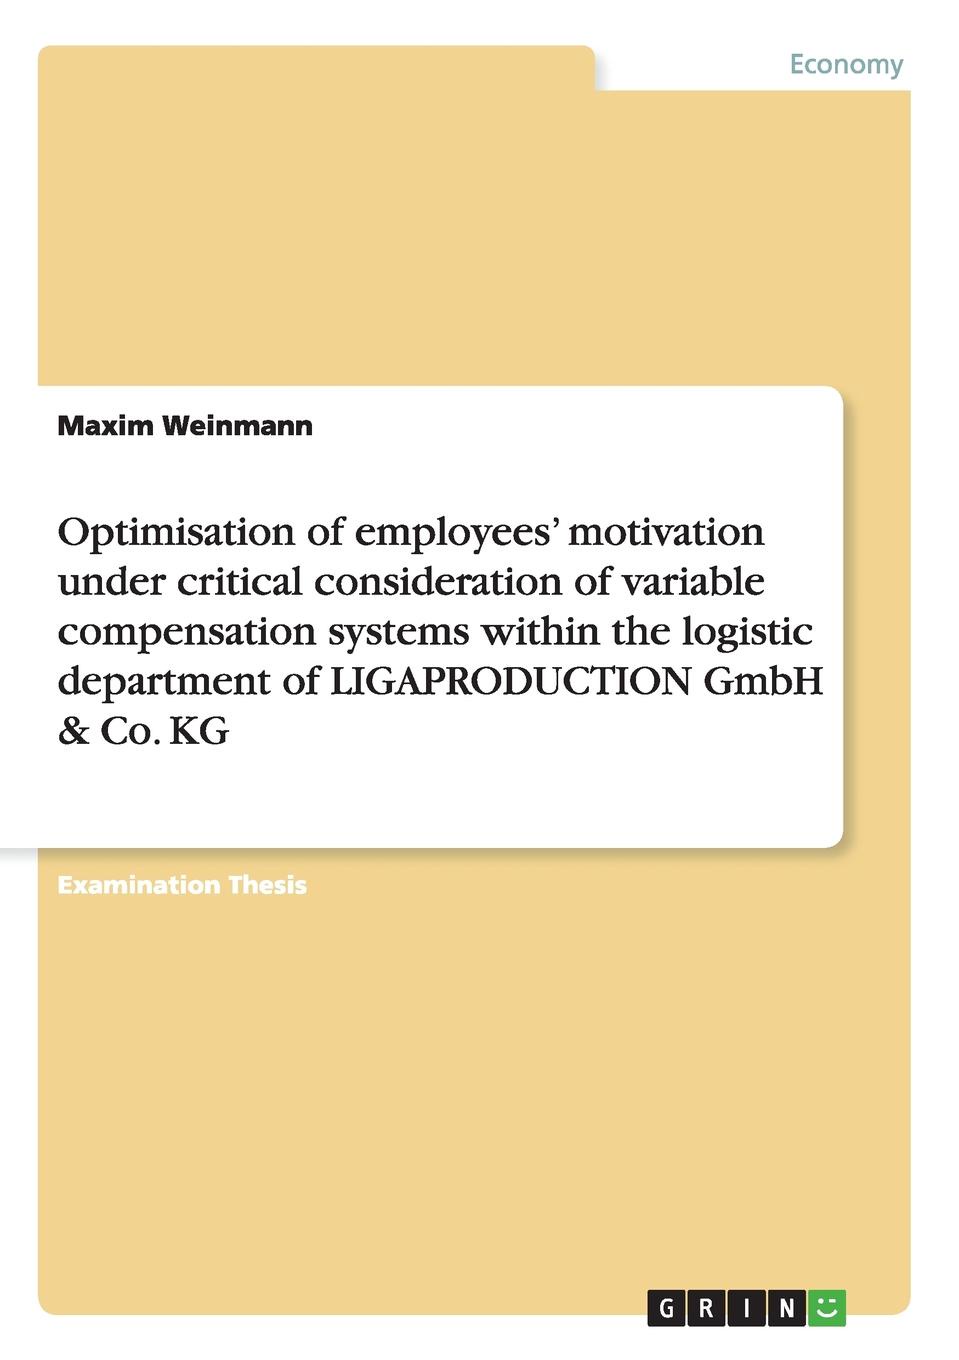 Optimisation of employees. motivation under critical consideration of variable compensation systems within the logistic department  of LIGAPRODUCTION GmbH . Co. KG